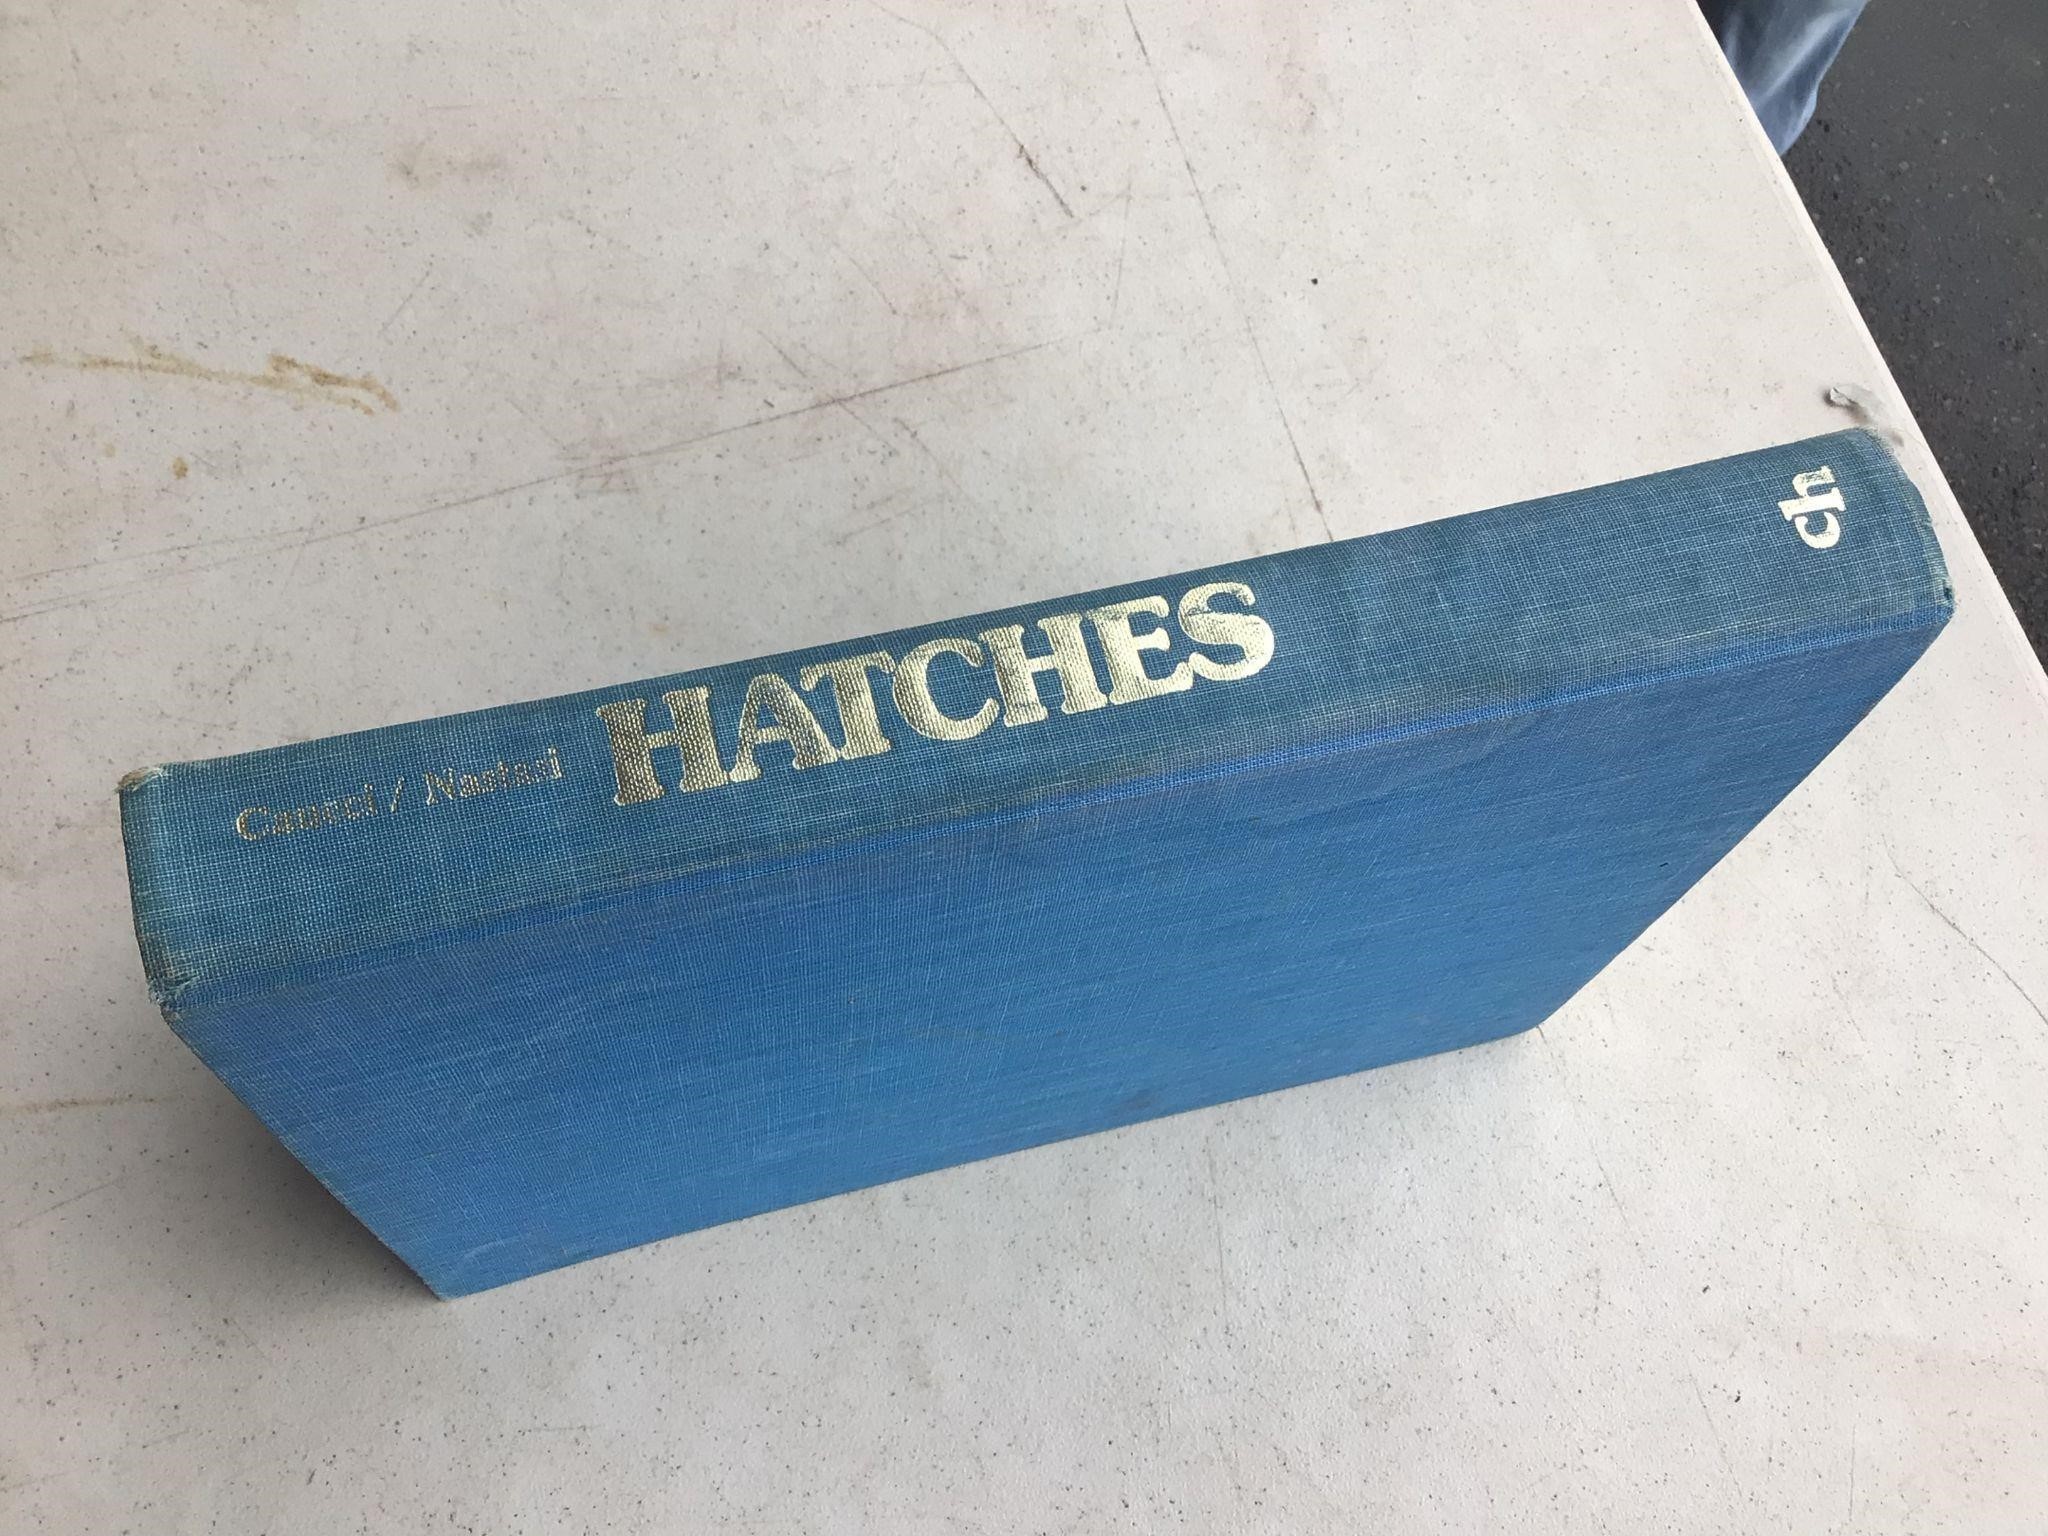 HATCHES - COMPLETE GUIDE TO FISHING THE HATCHES